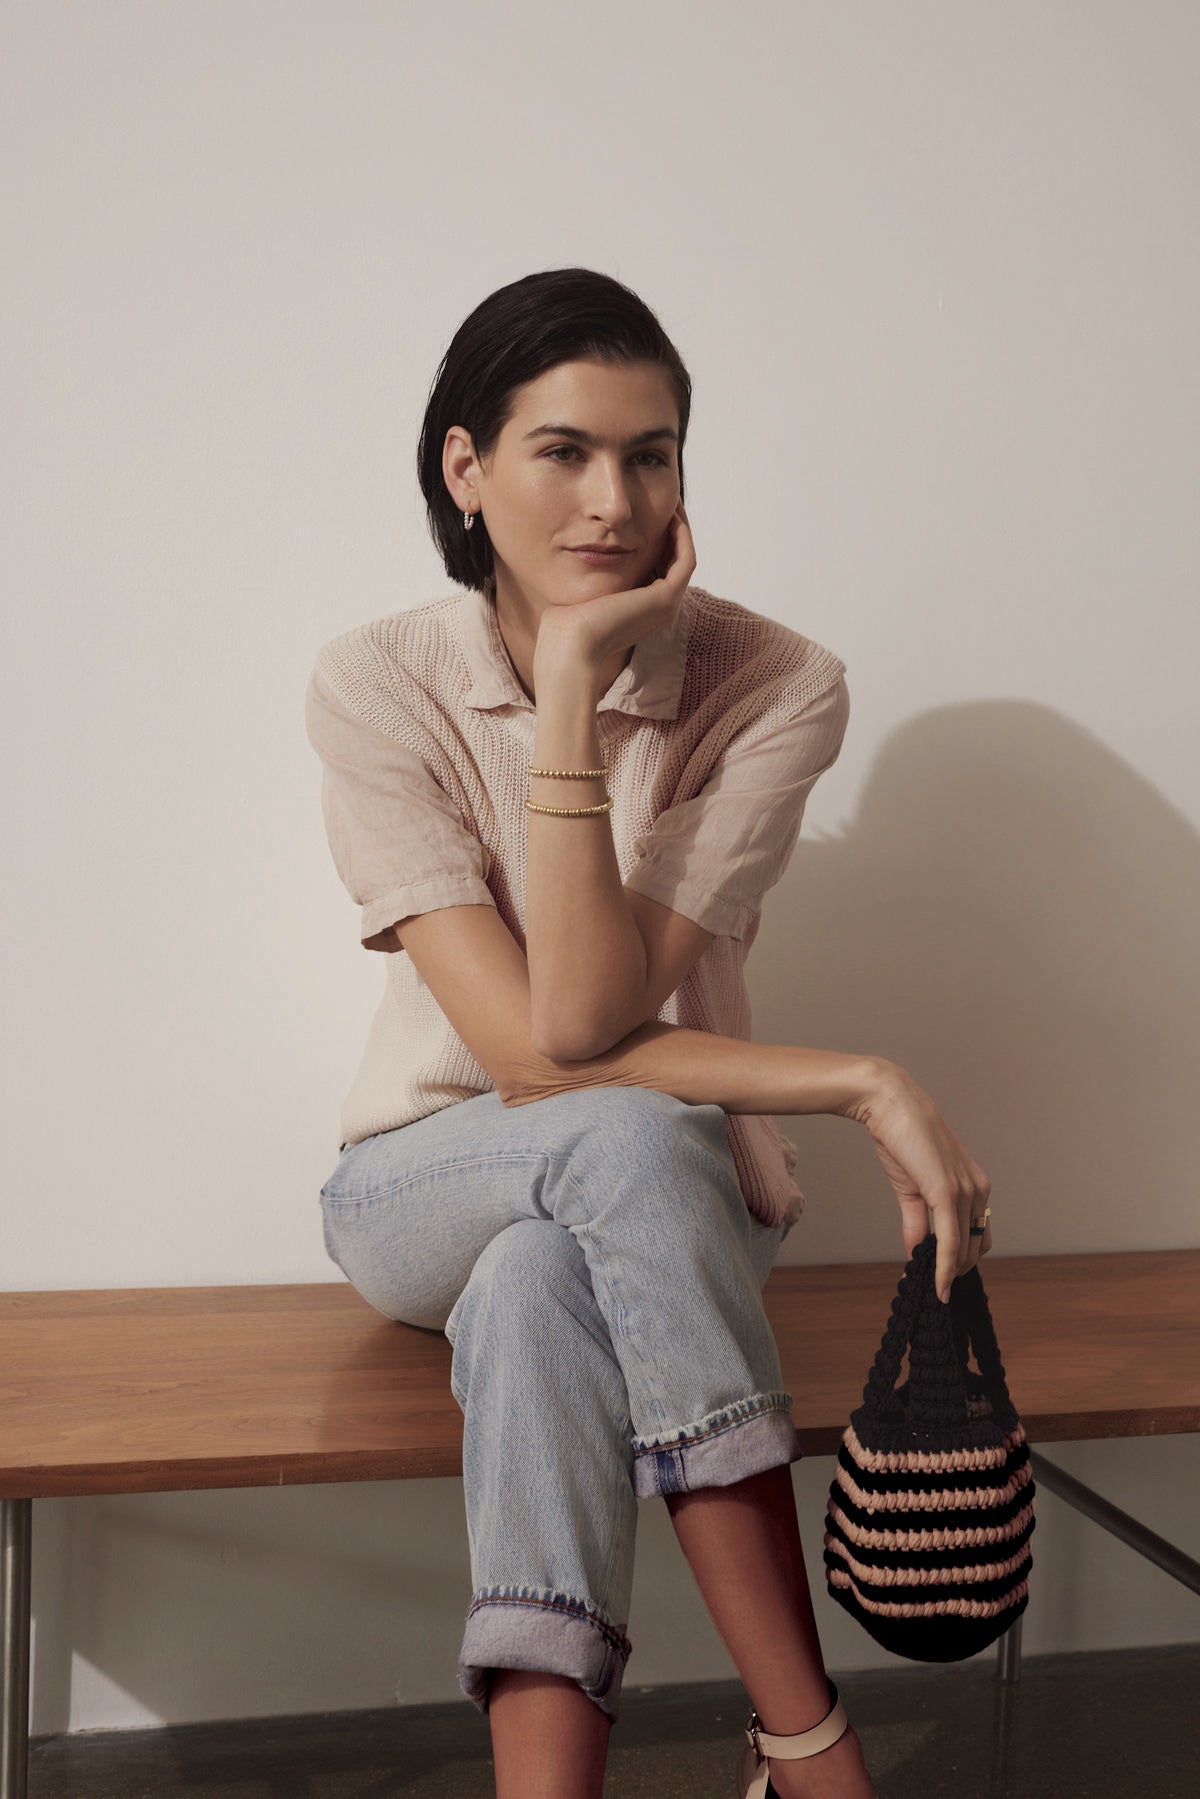 A woman sits on a wooden bench, resting her chin on her hand, wearing a pink blouse, jeans, and holding a Velvet by Jenny Graham KNOX BAG.-36890823262401